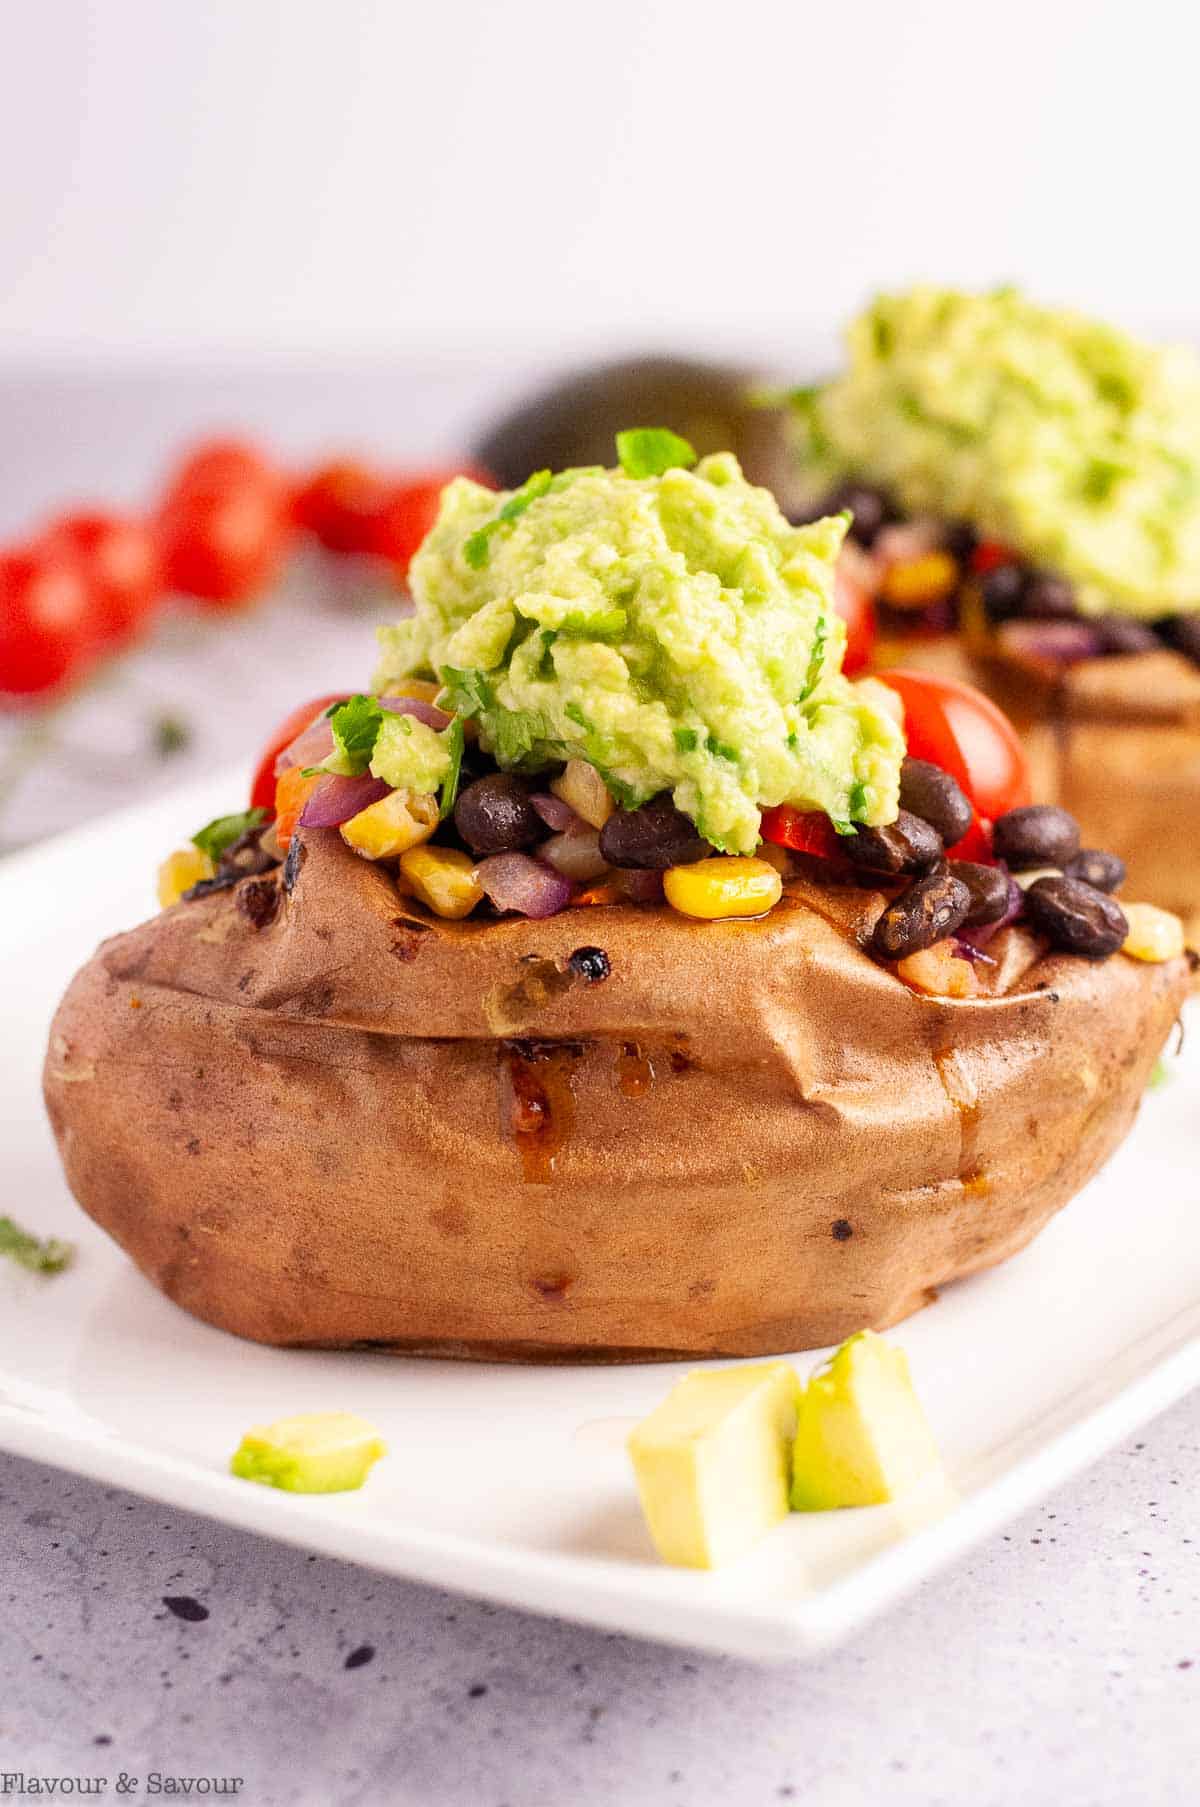 A  baked sweet potato with black beans, topped with guacamole.